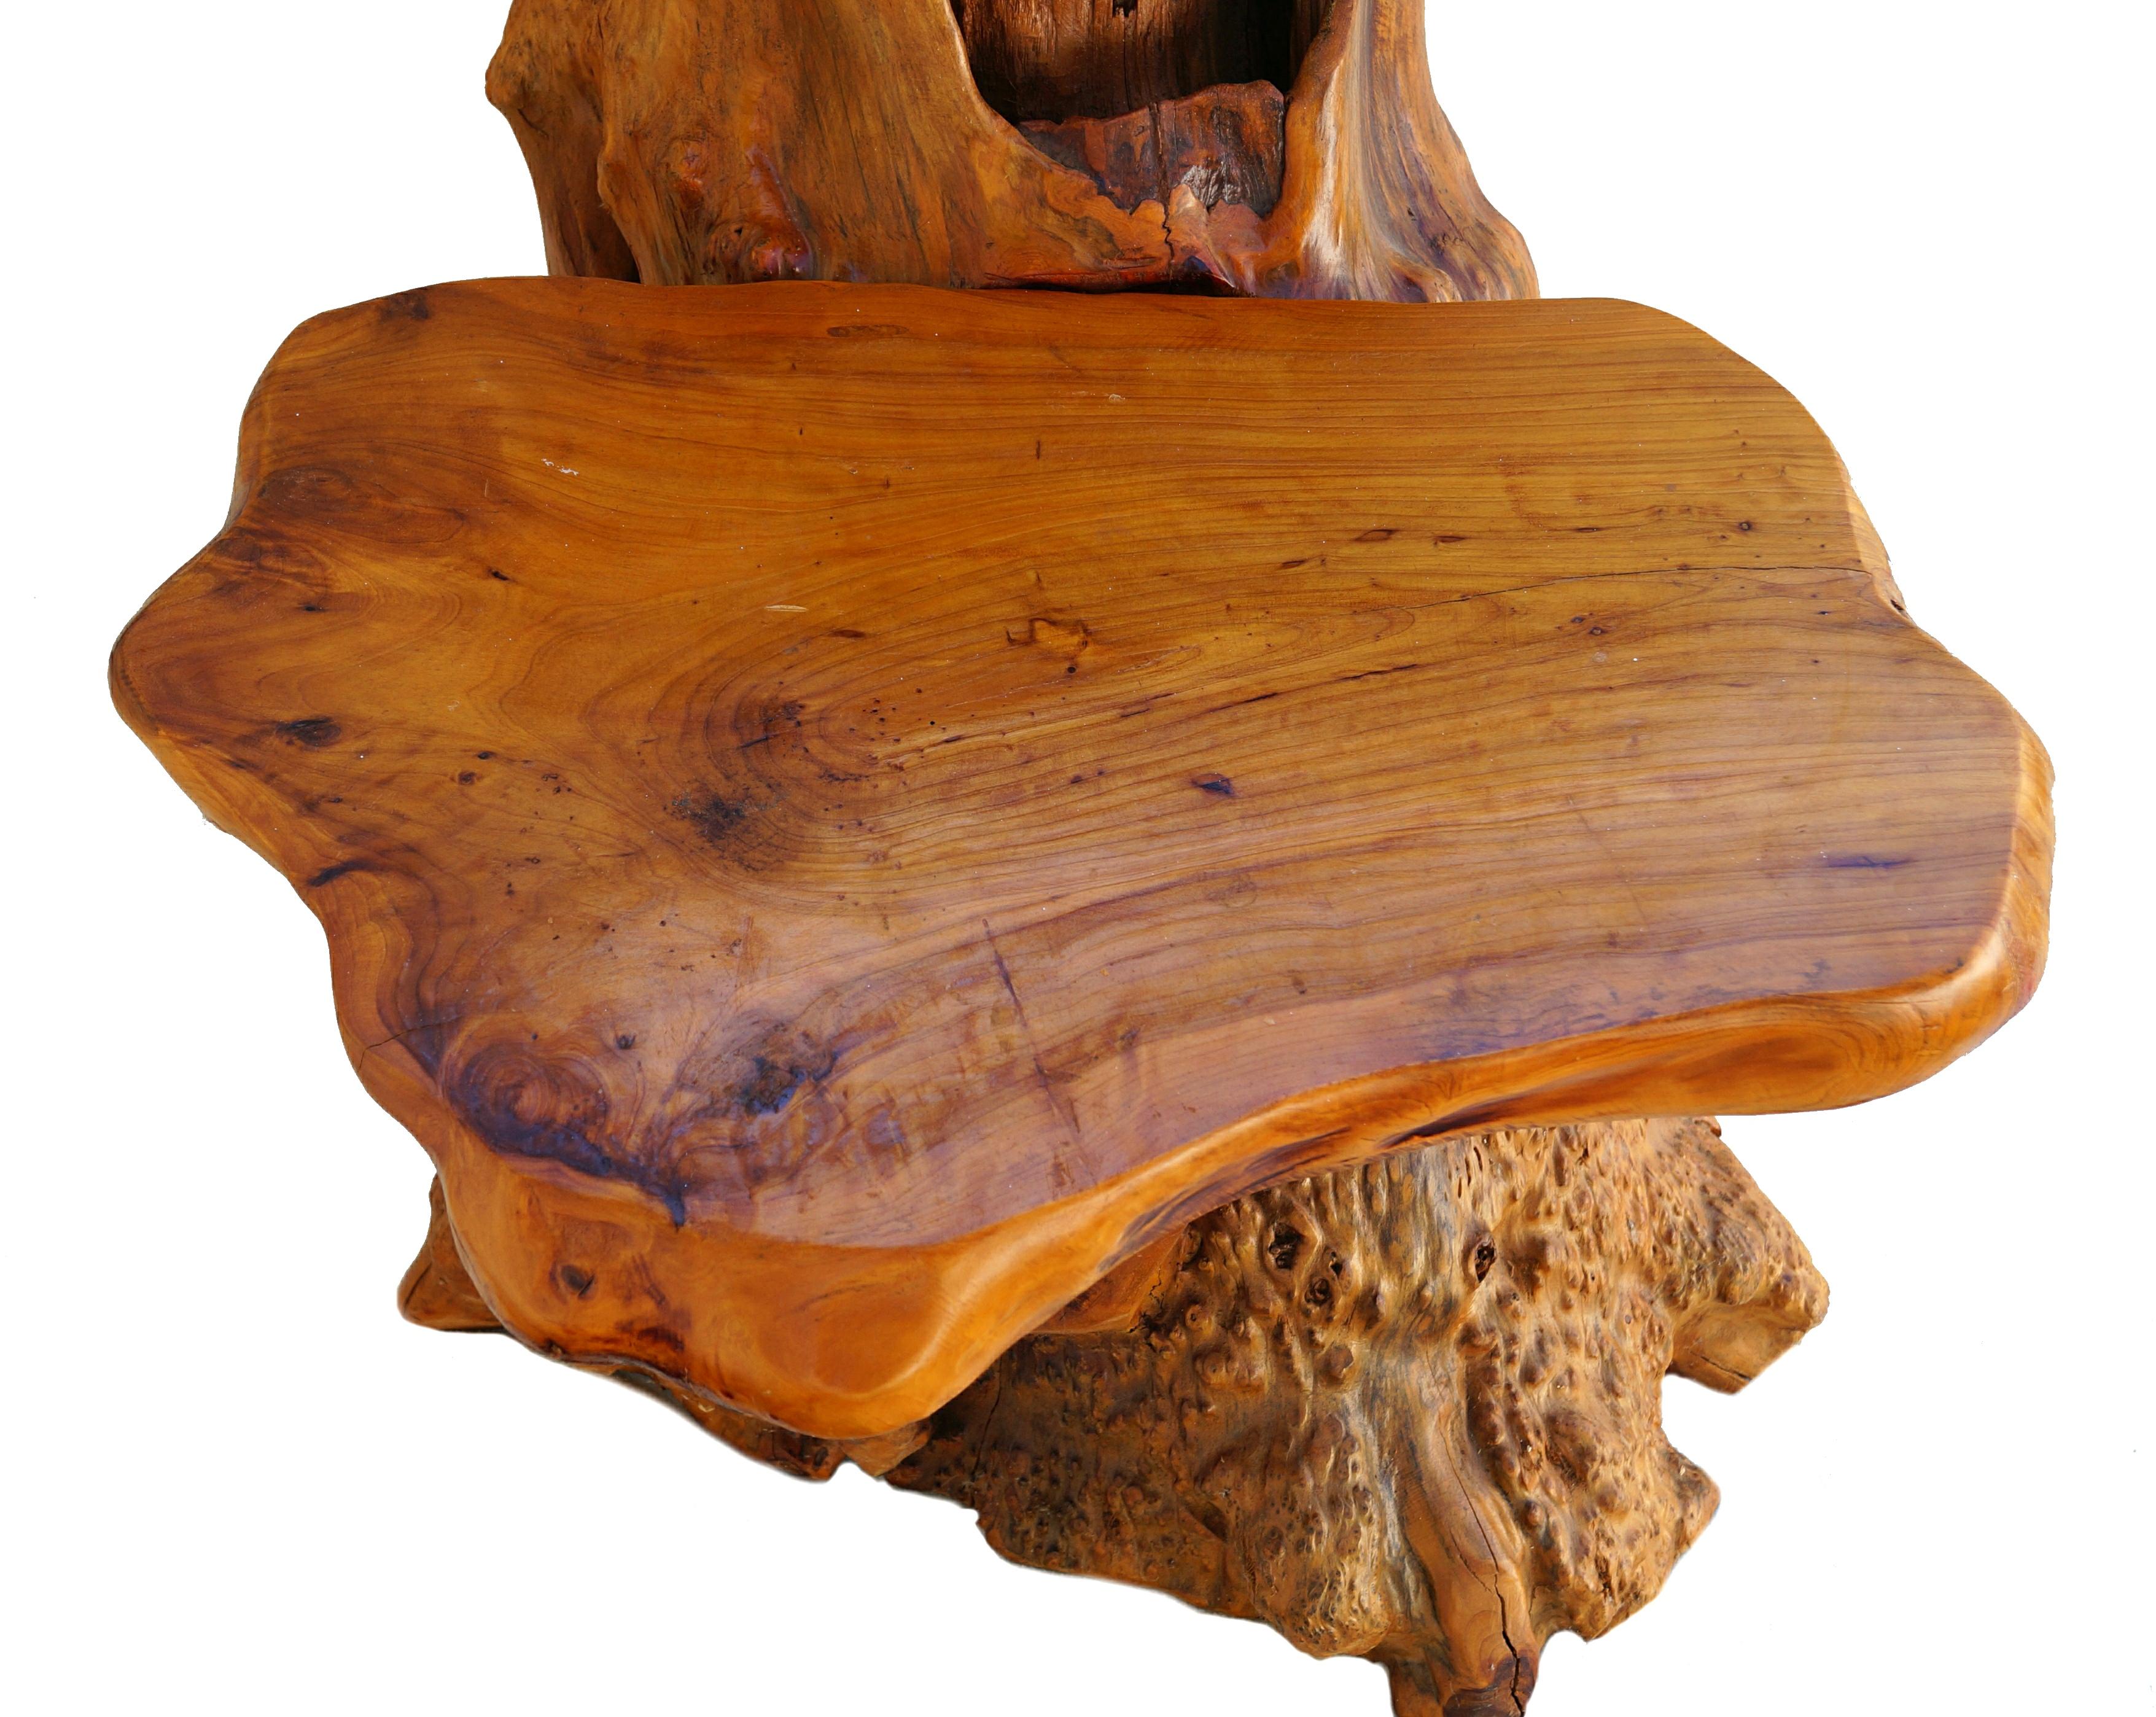 Organic Modern Freeform Sculptural Organic Natural Tree Root Wood Pedestal Plant Stand Table For Sale